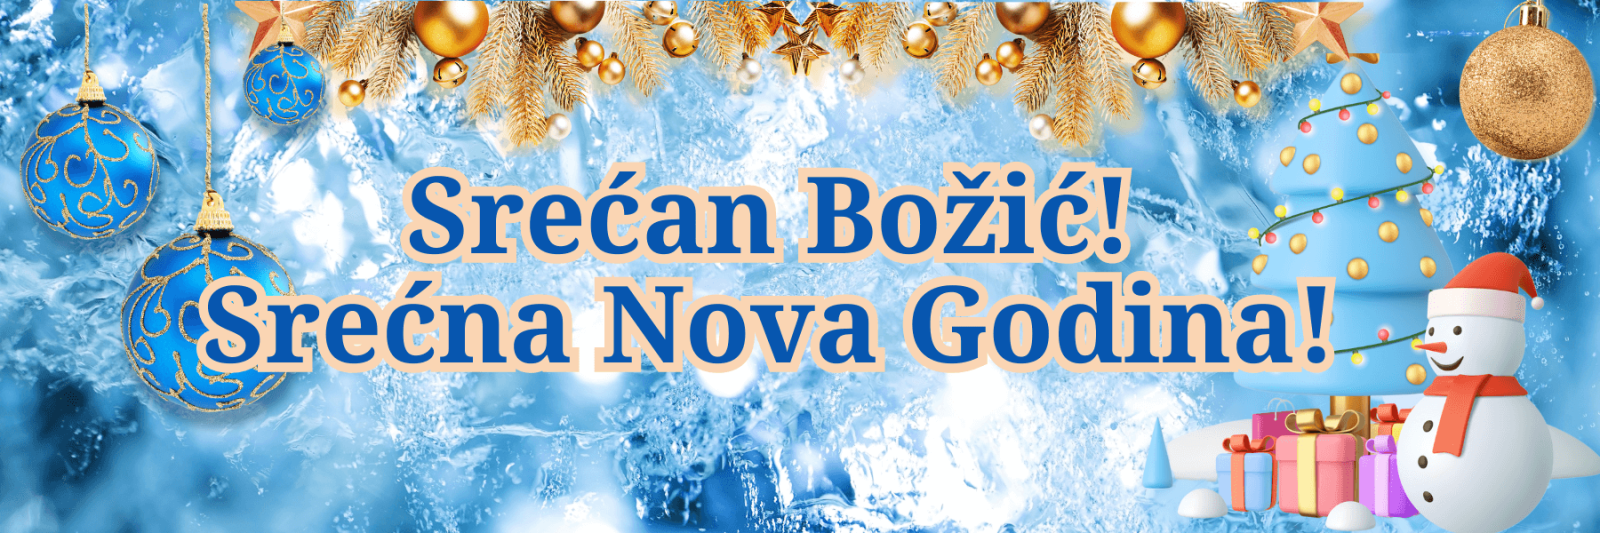 Merry Christmas and Happy New Year! in Montenegrin